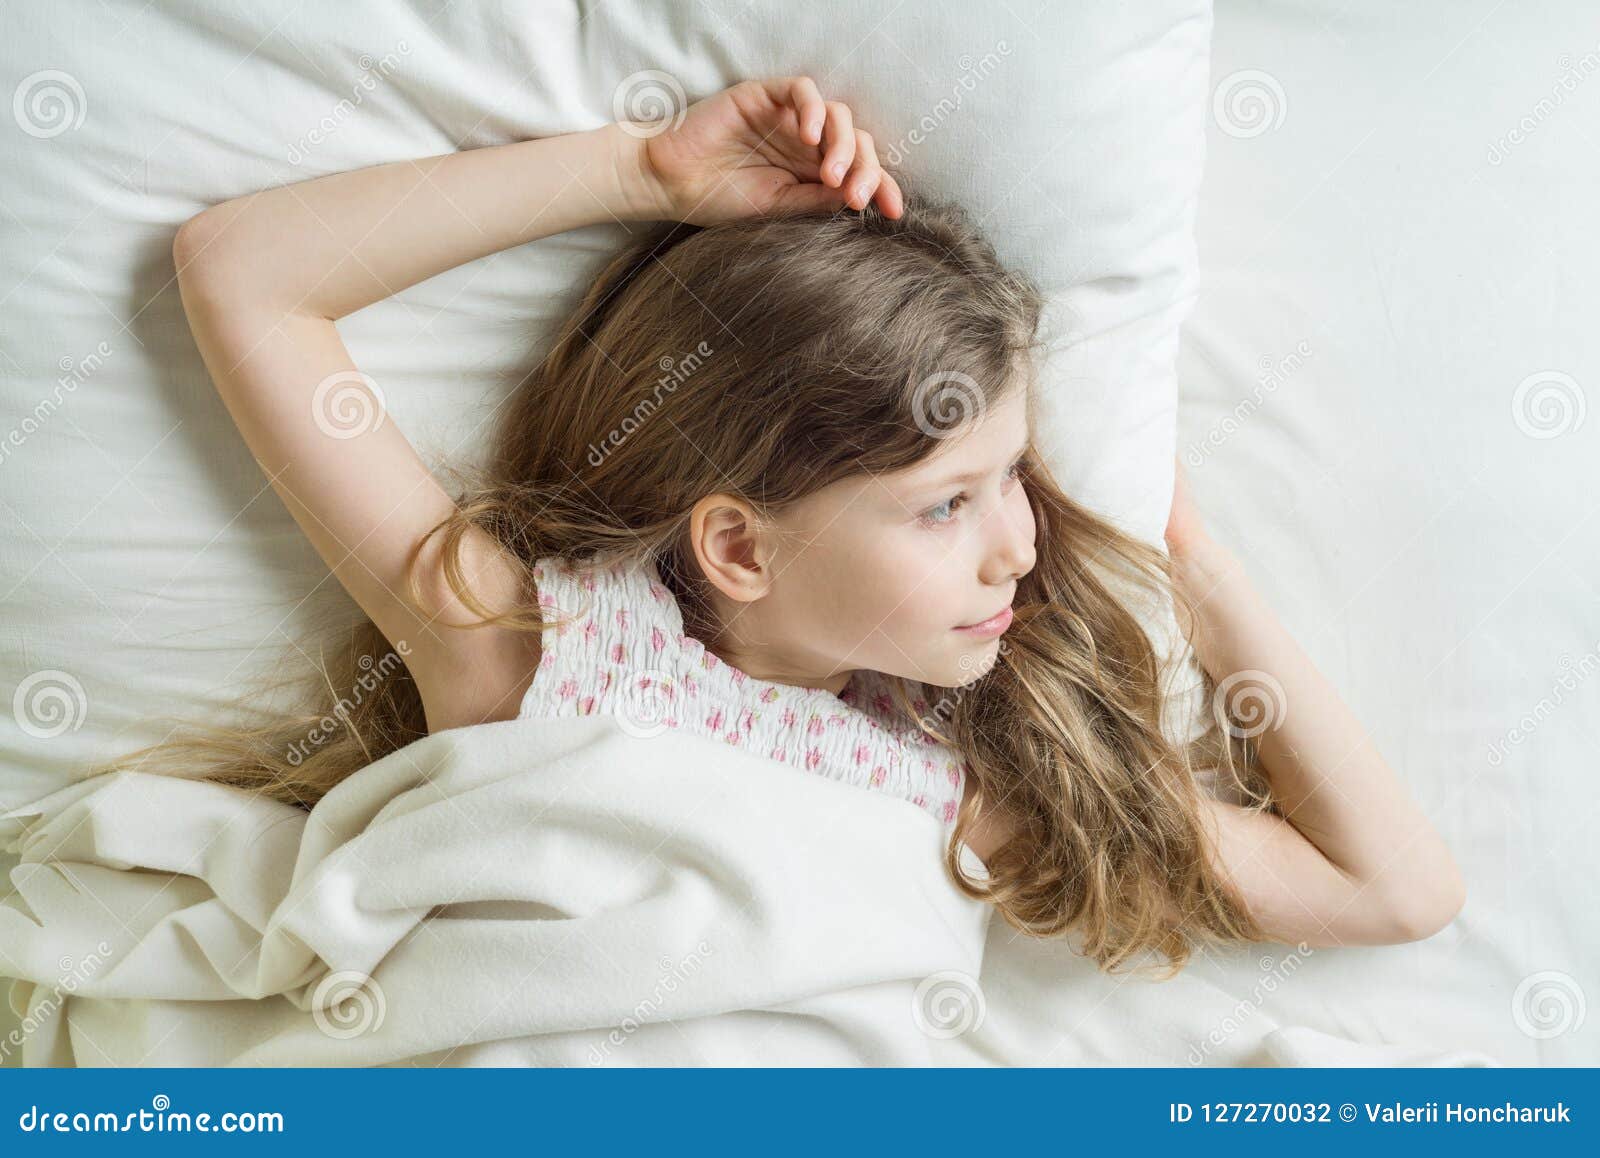 Good Morning, Child Girl Blonde with Long Wavy Hair Wakes Up ...